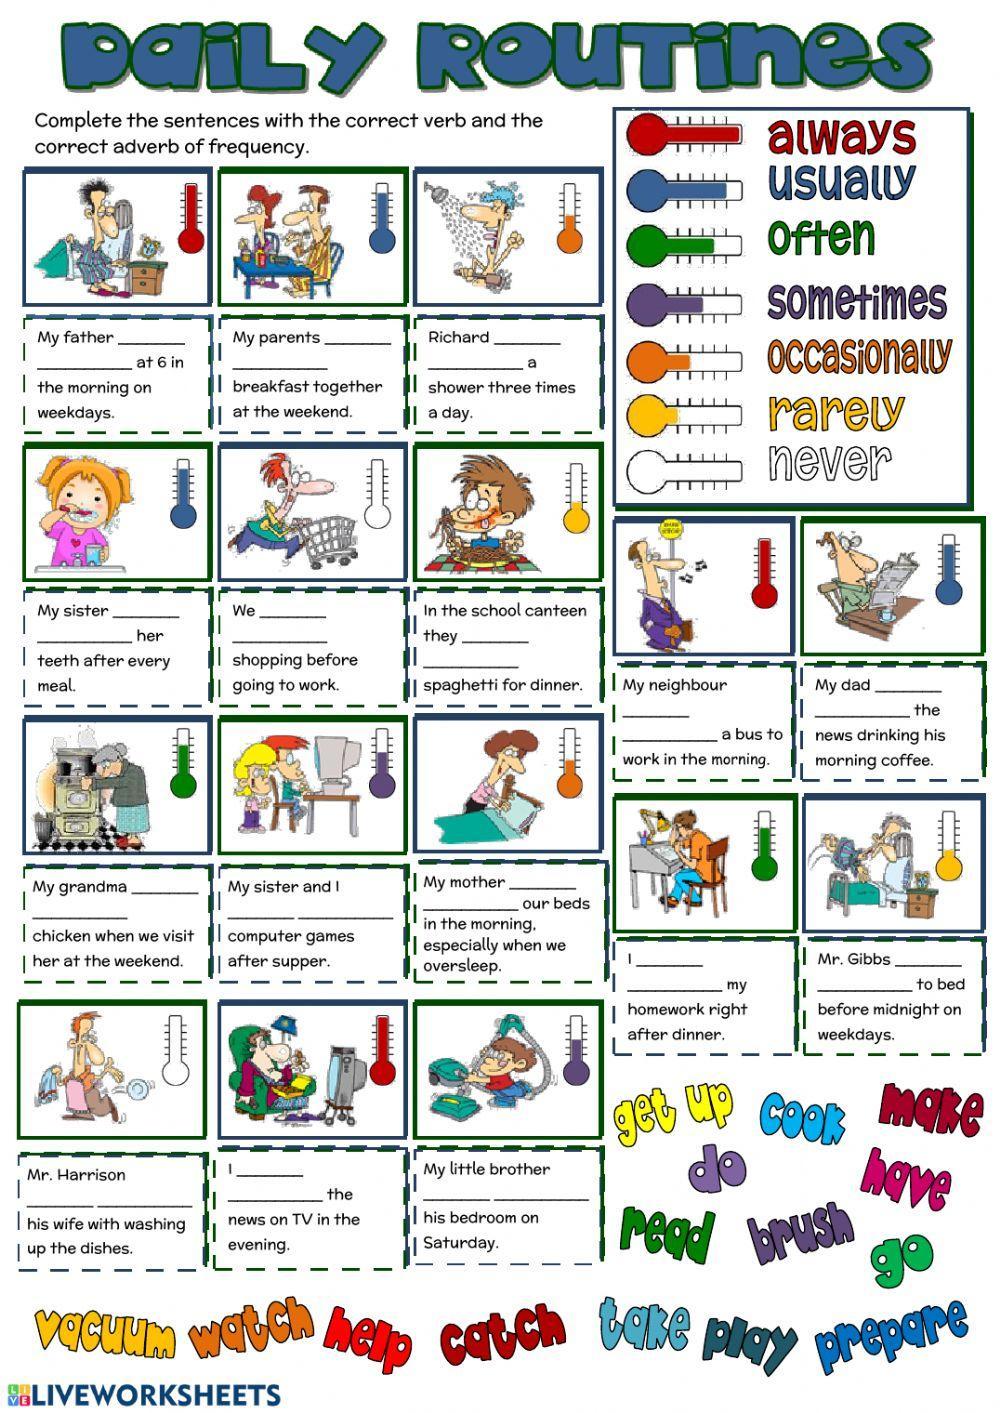 Routines exercises. Игры на Daily Routine. Упражнения Daily Routine present simple. Worksheets грамматика. Always usually sometimes never Worksheet.